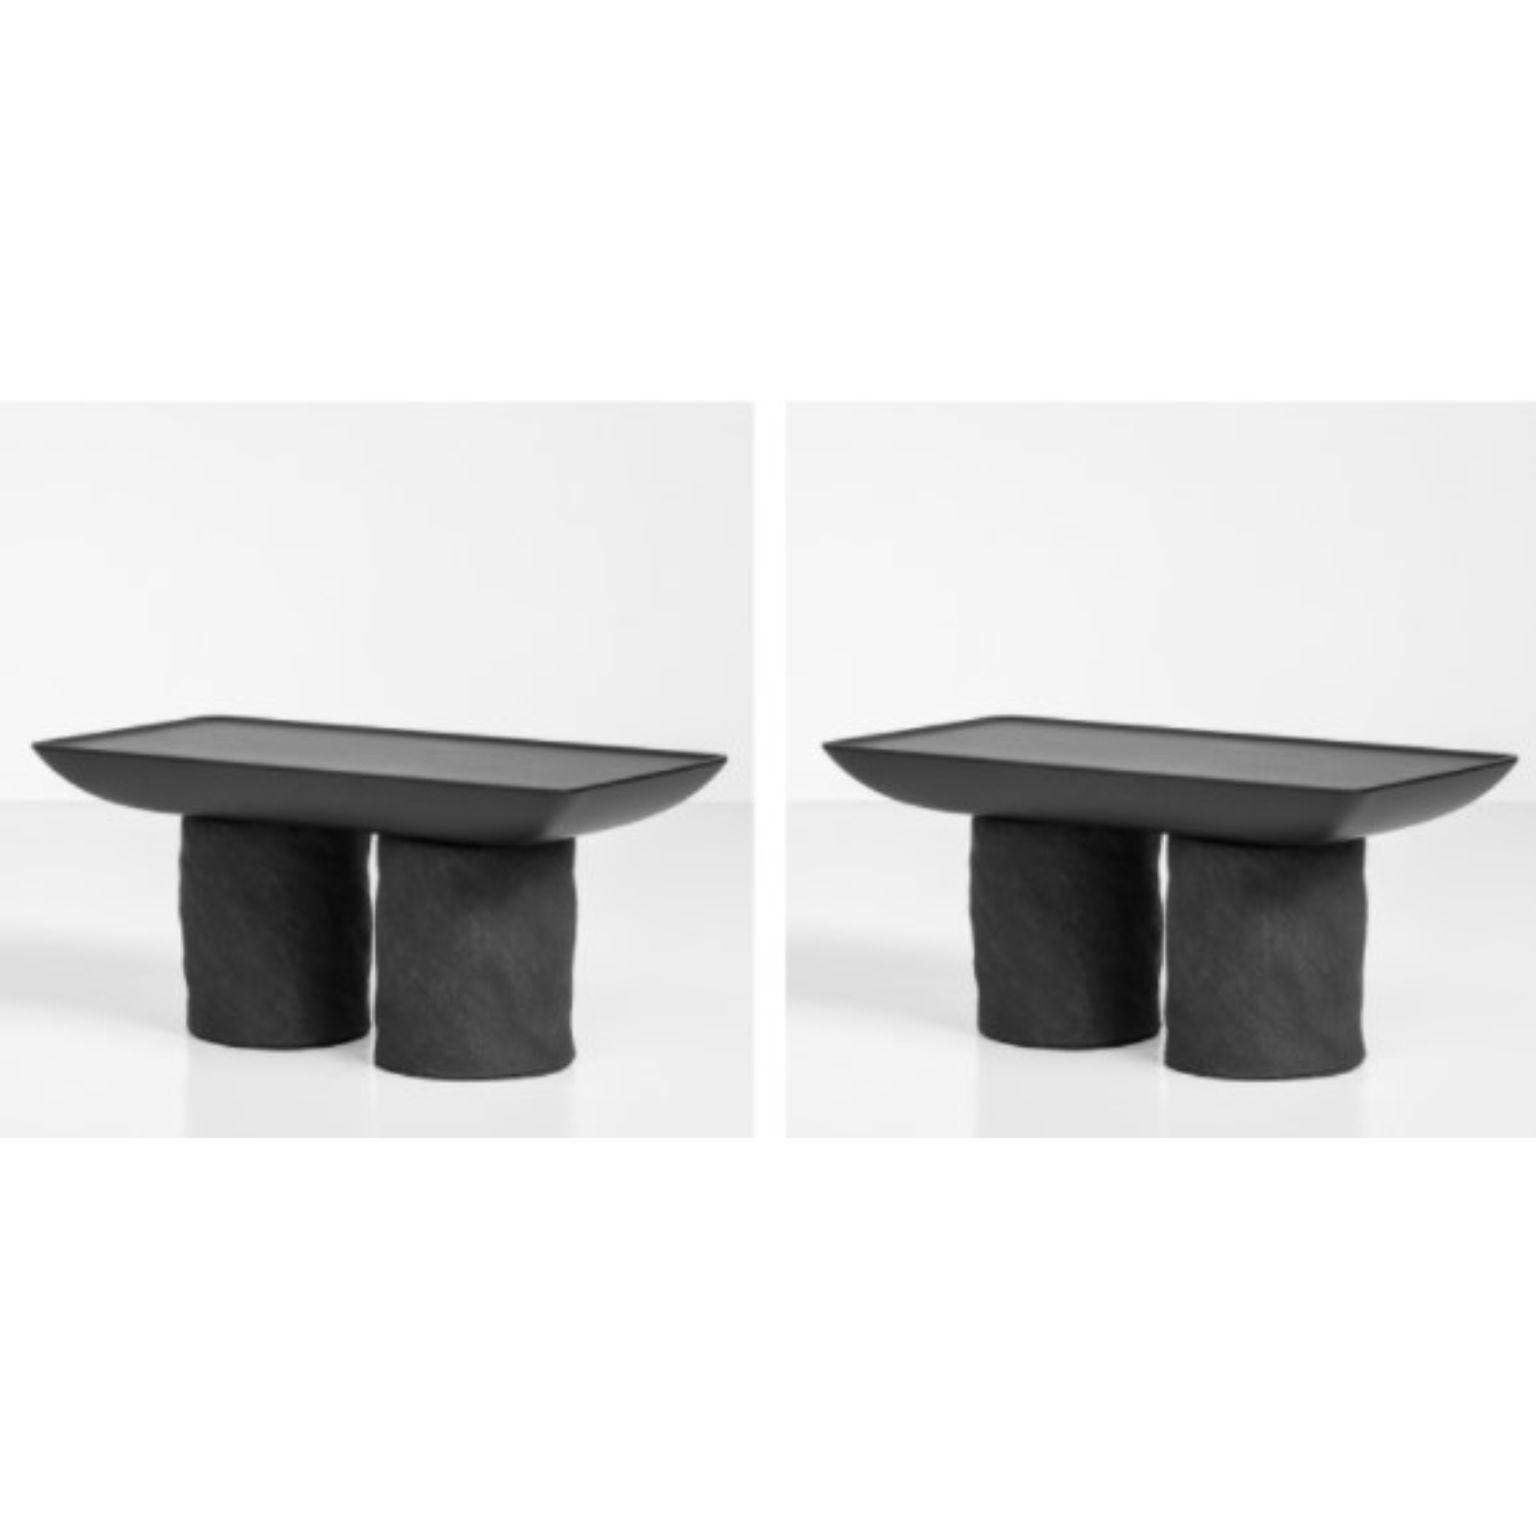 Set of 2 Small Korotun coffee tables by Faina
Design: Victoriya Yakusha
Materials: Clay, Wood
Dimensions: W 65 x D 32 x H 30 cm

Almost carved in stone, minimalist coffee table with sharp outlines has sturdy character. With its authentic